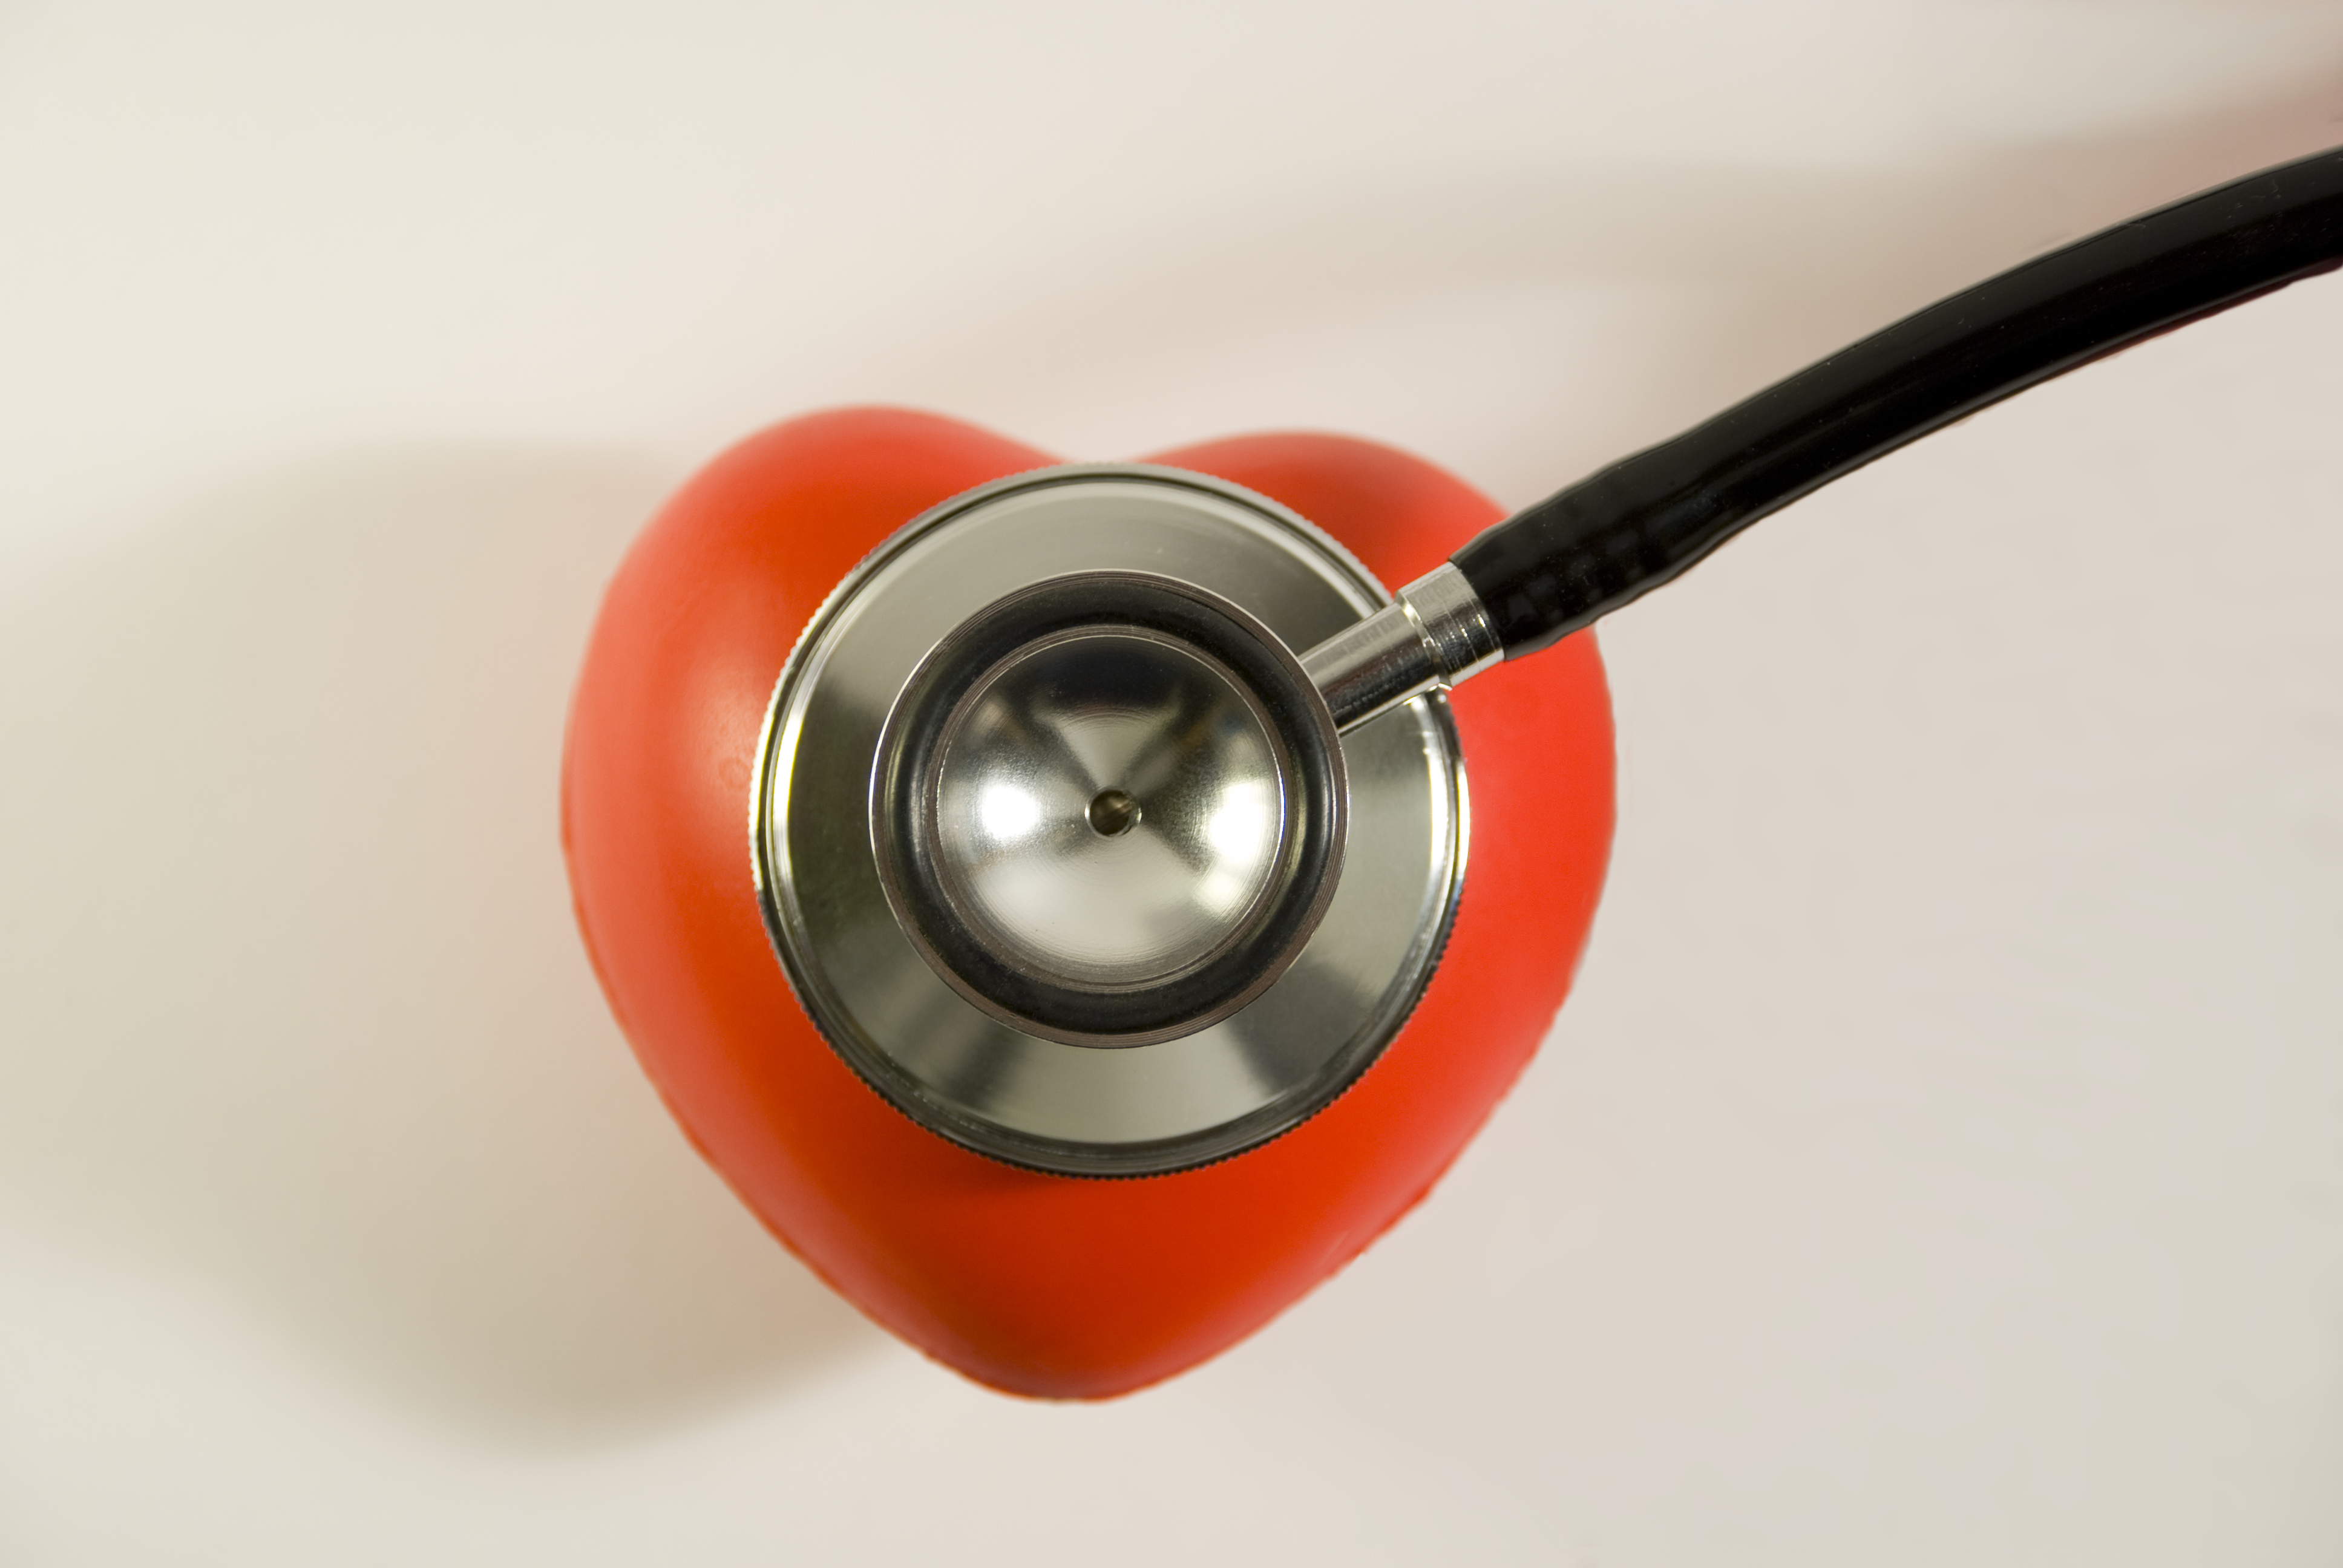 Heart and Stethoscope